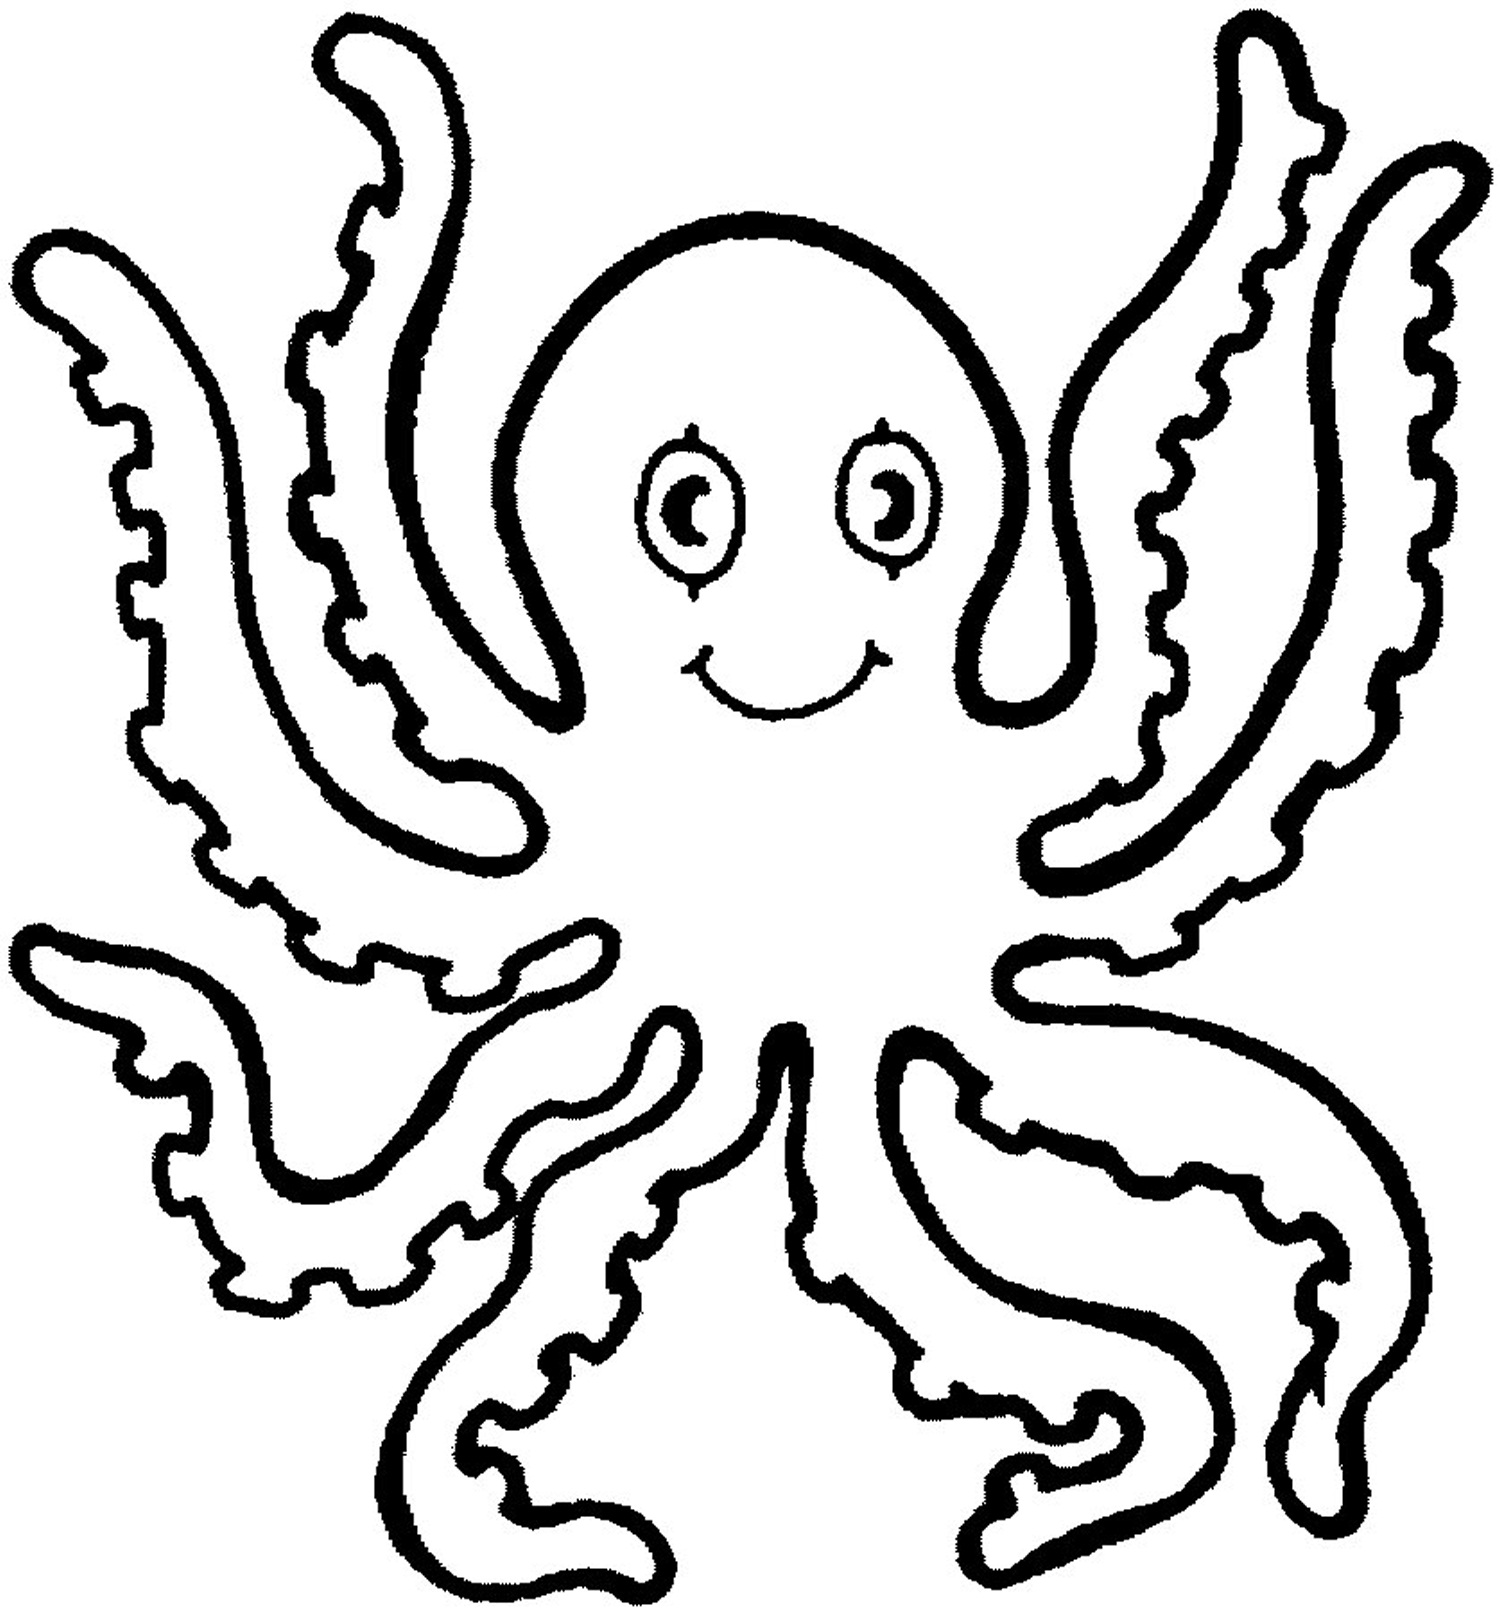 Free Printable Octopus Coloring Pages For Kids - Animal Place